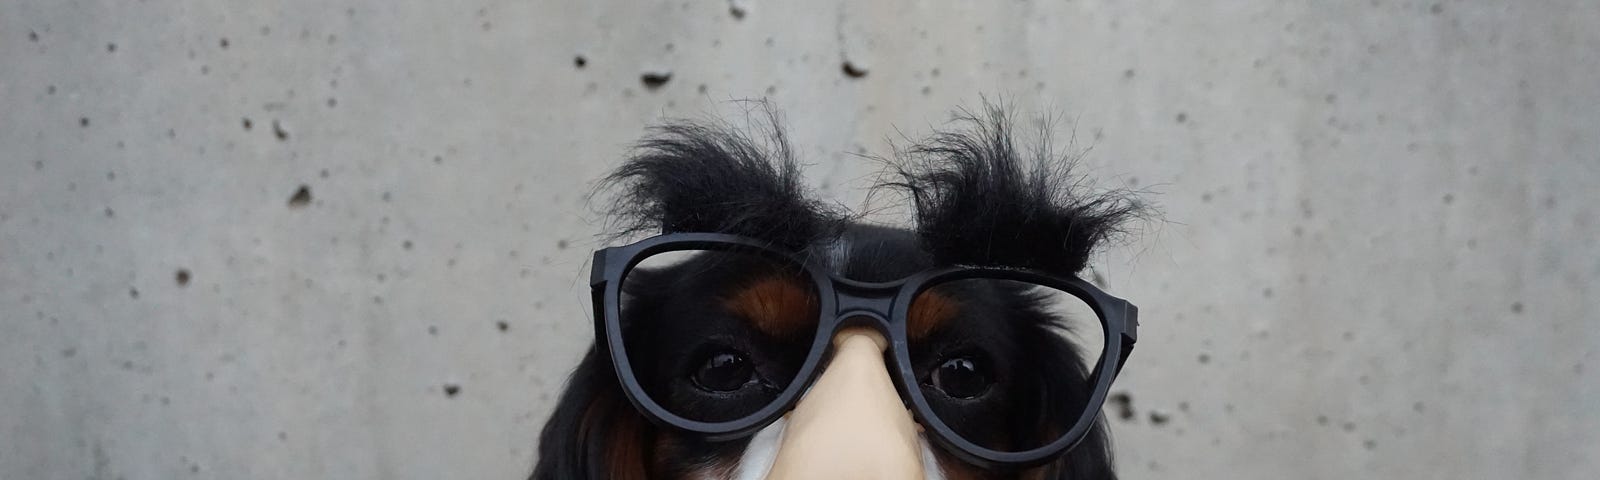 dog with sunglasses and fake nose